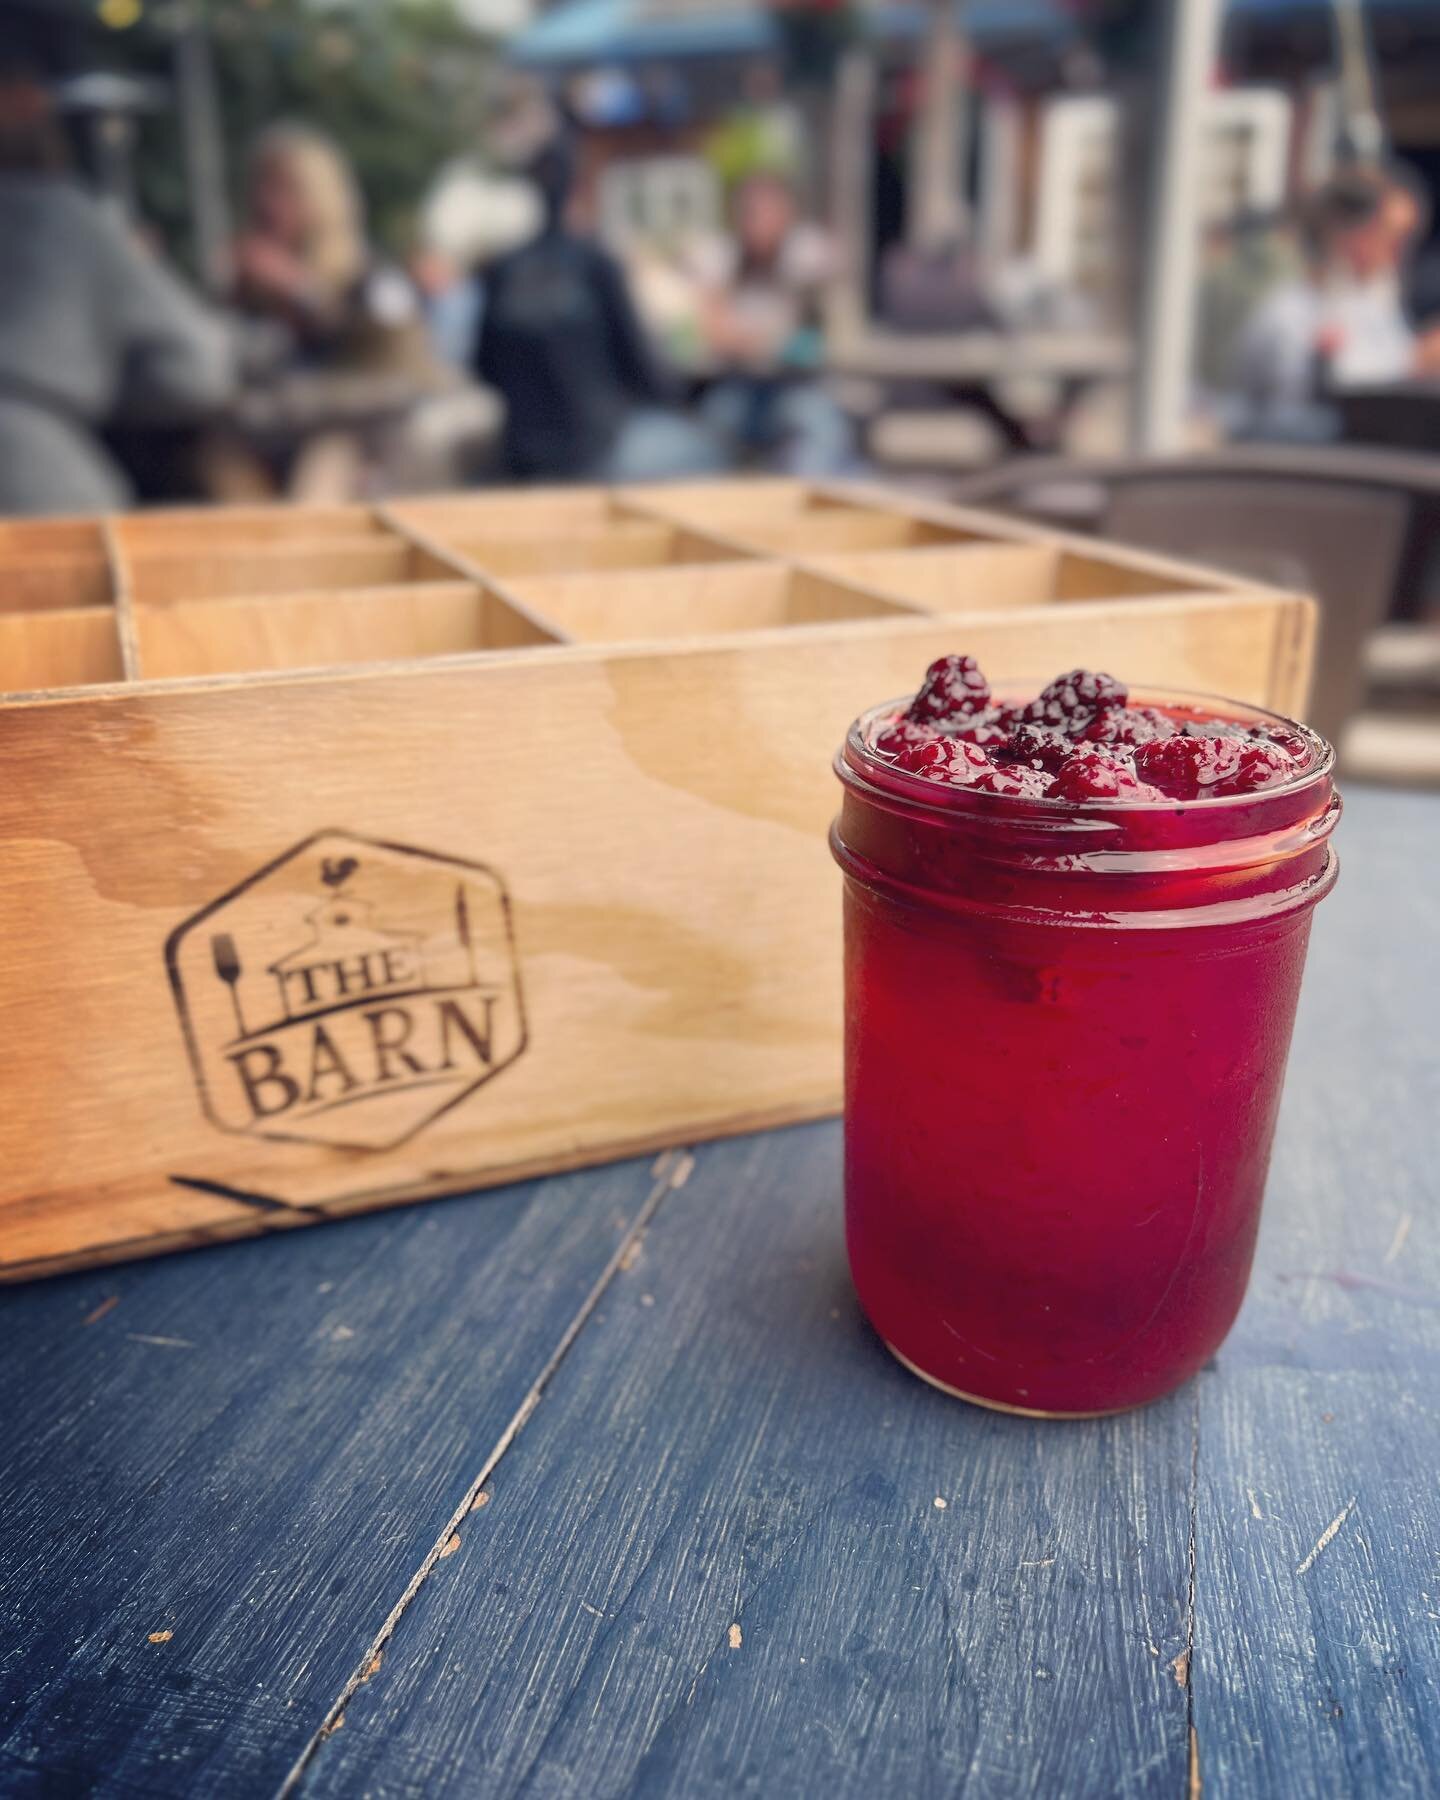 Olallieberry Lemonade @thebarnhmb  hits the spot after working in the garden all day.